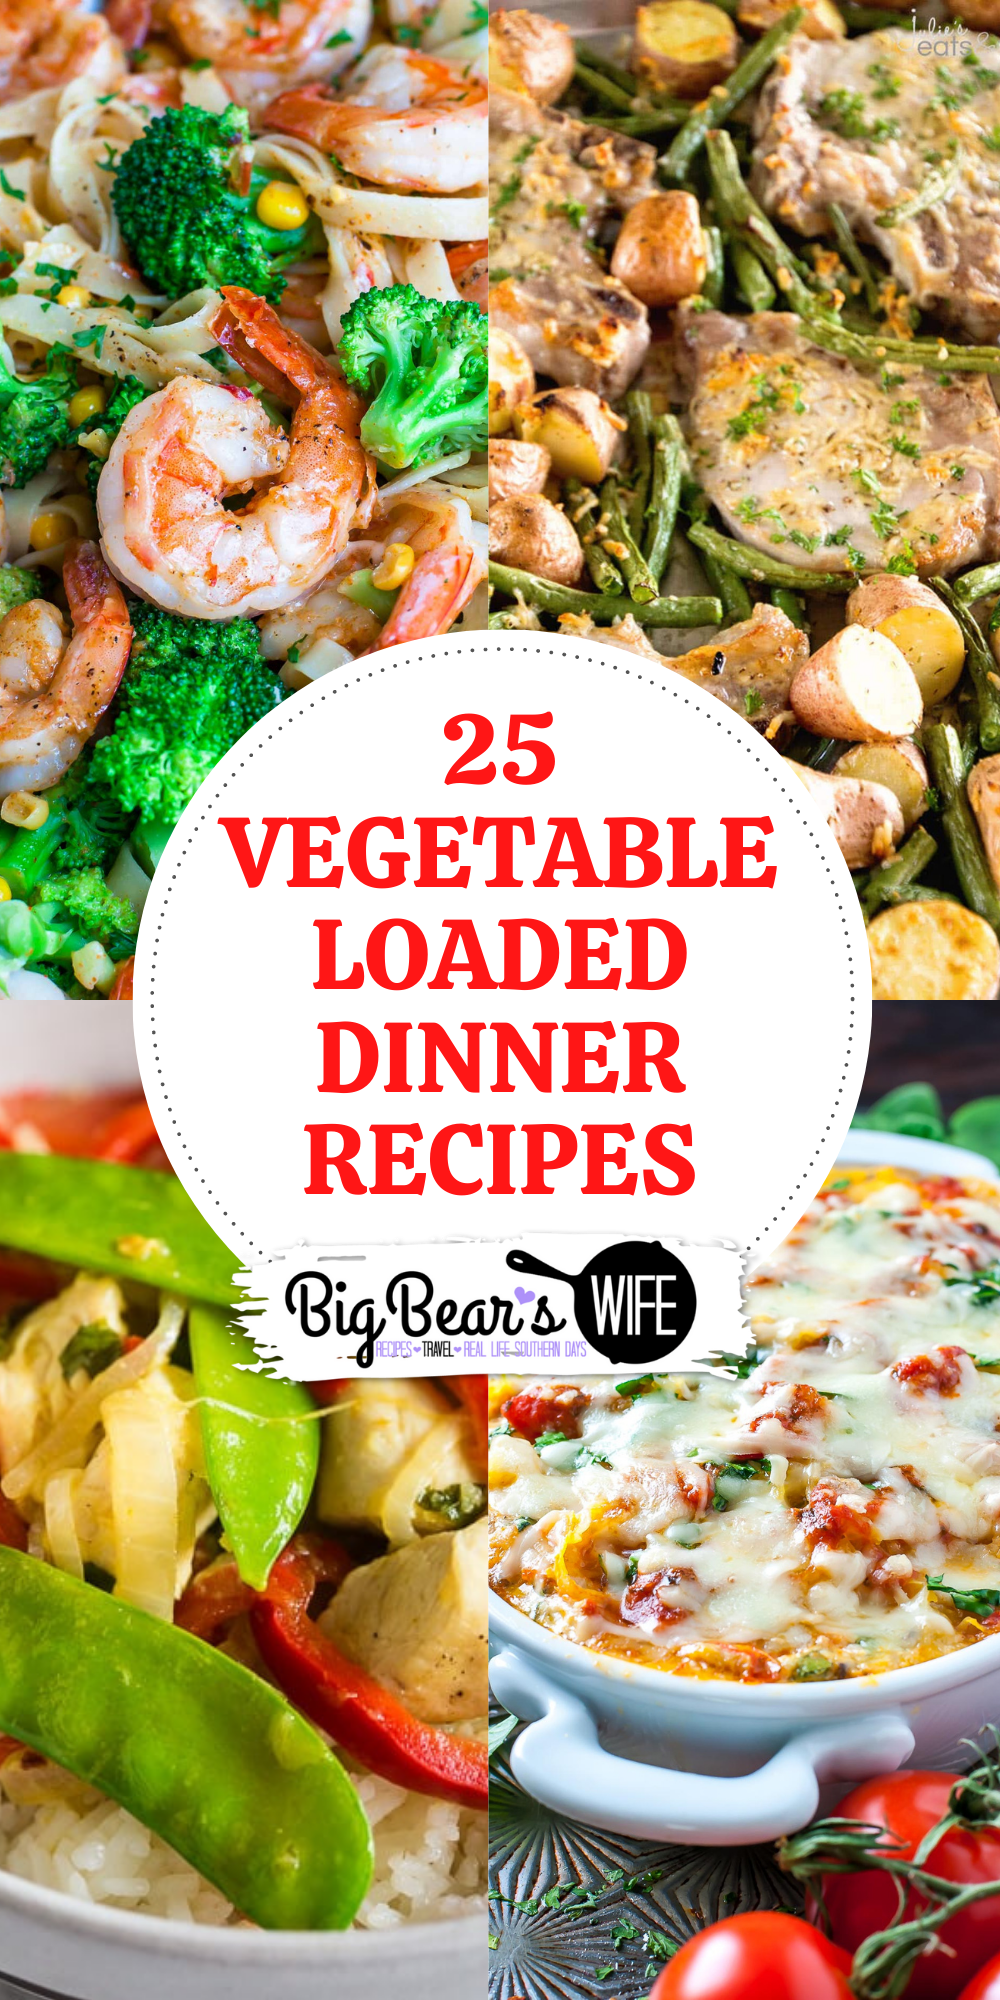 Trying to add more vegetables into your diet? Want your family to eat more vegetables without complaining? These 25 Vegetable Loaded Dinner Recipes will do the trick! via @bigbearswife